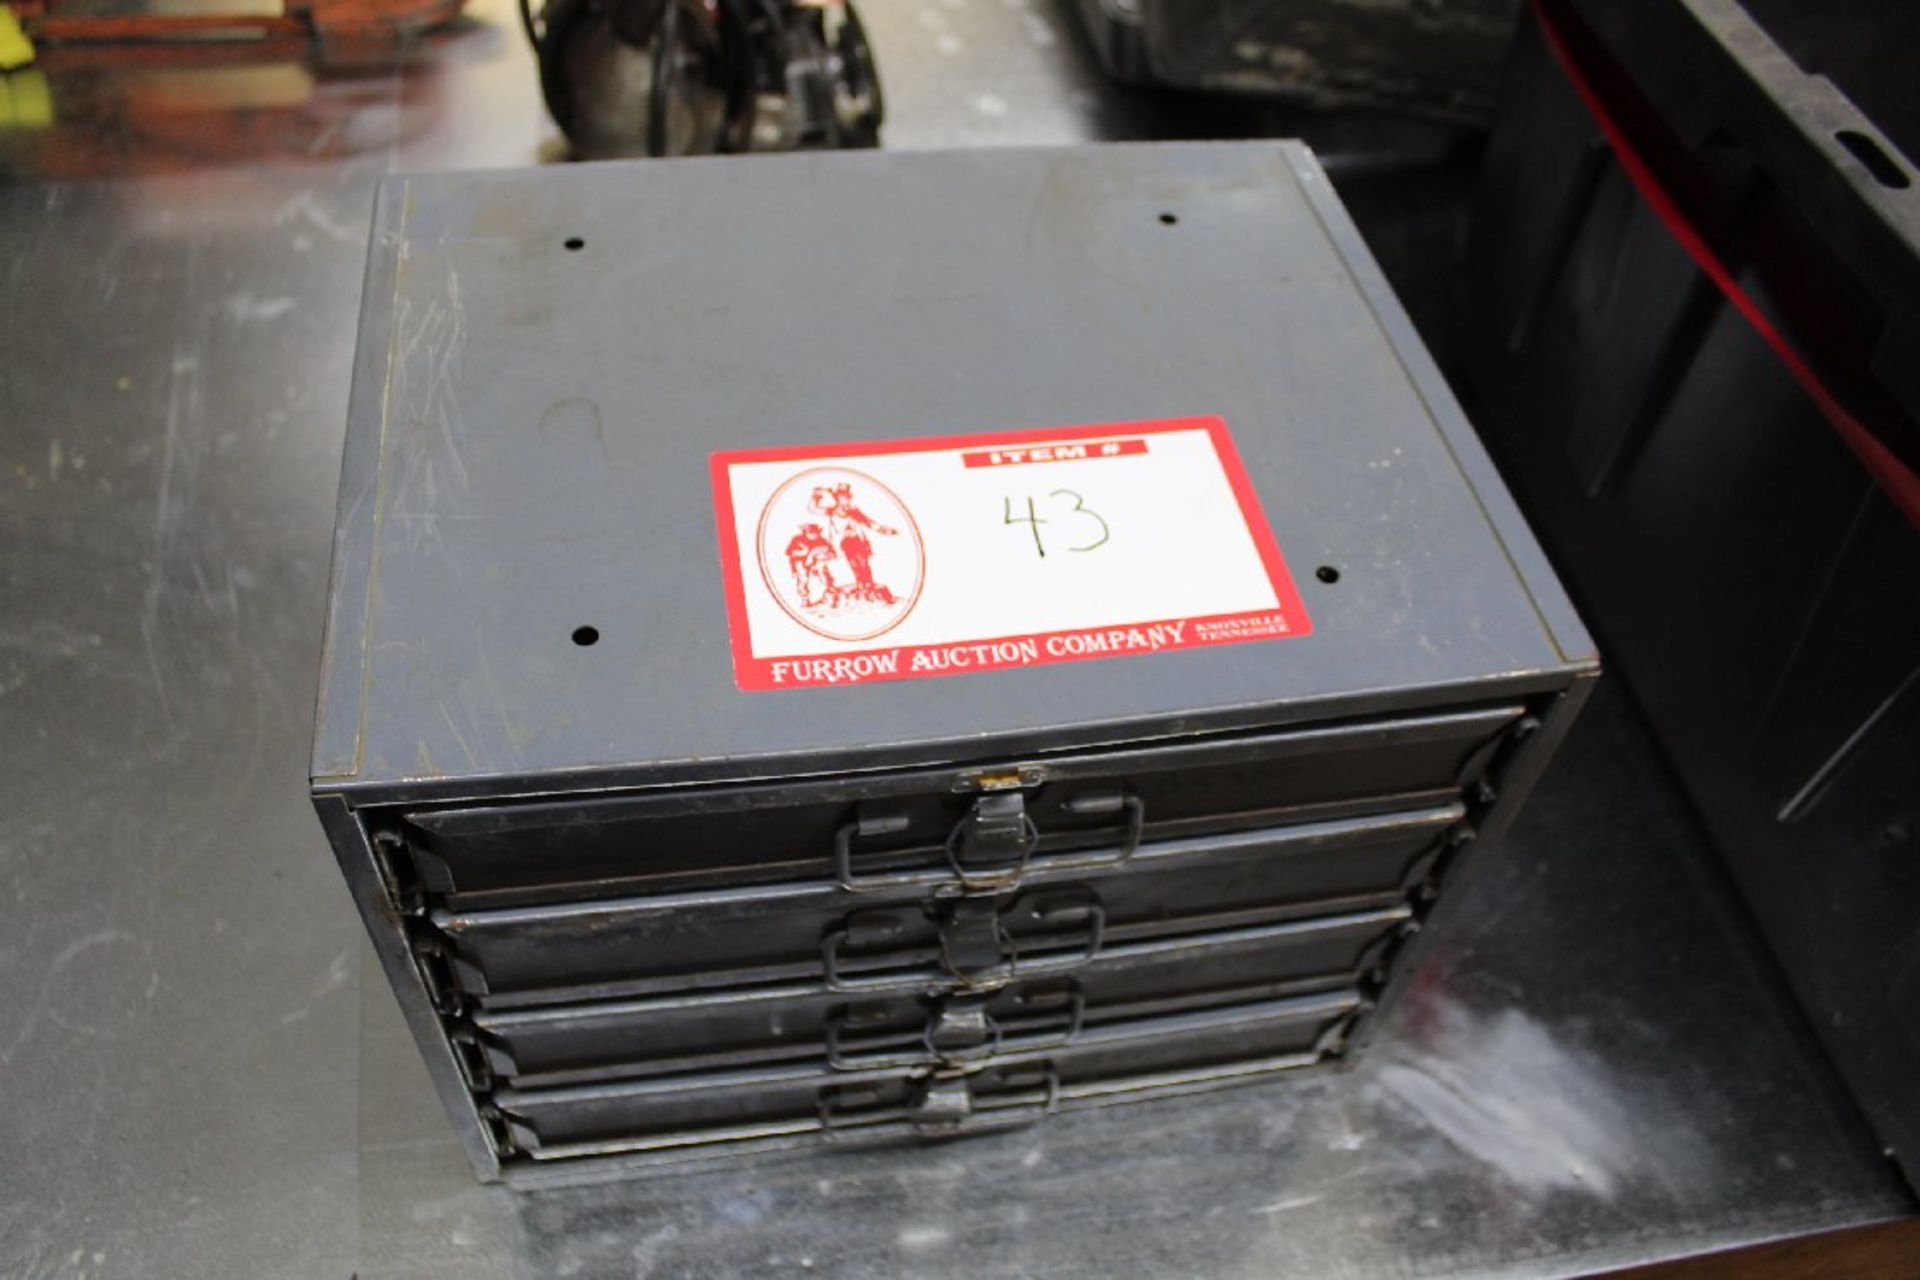 Four Drawer Parts Bin with Contents (brass fittings, needle valves, up sleeves, copper fittings,